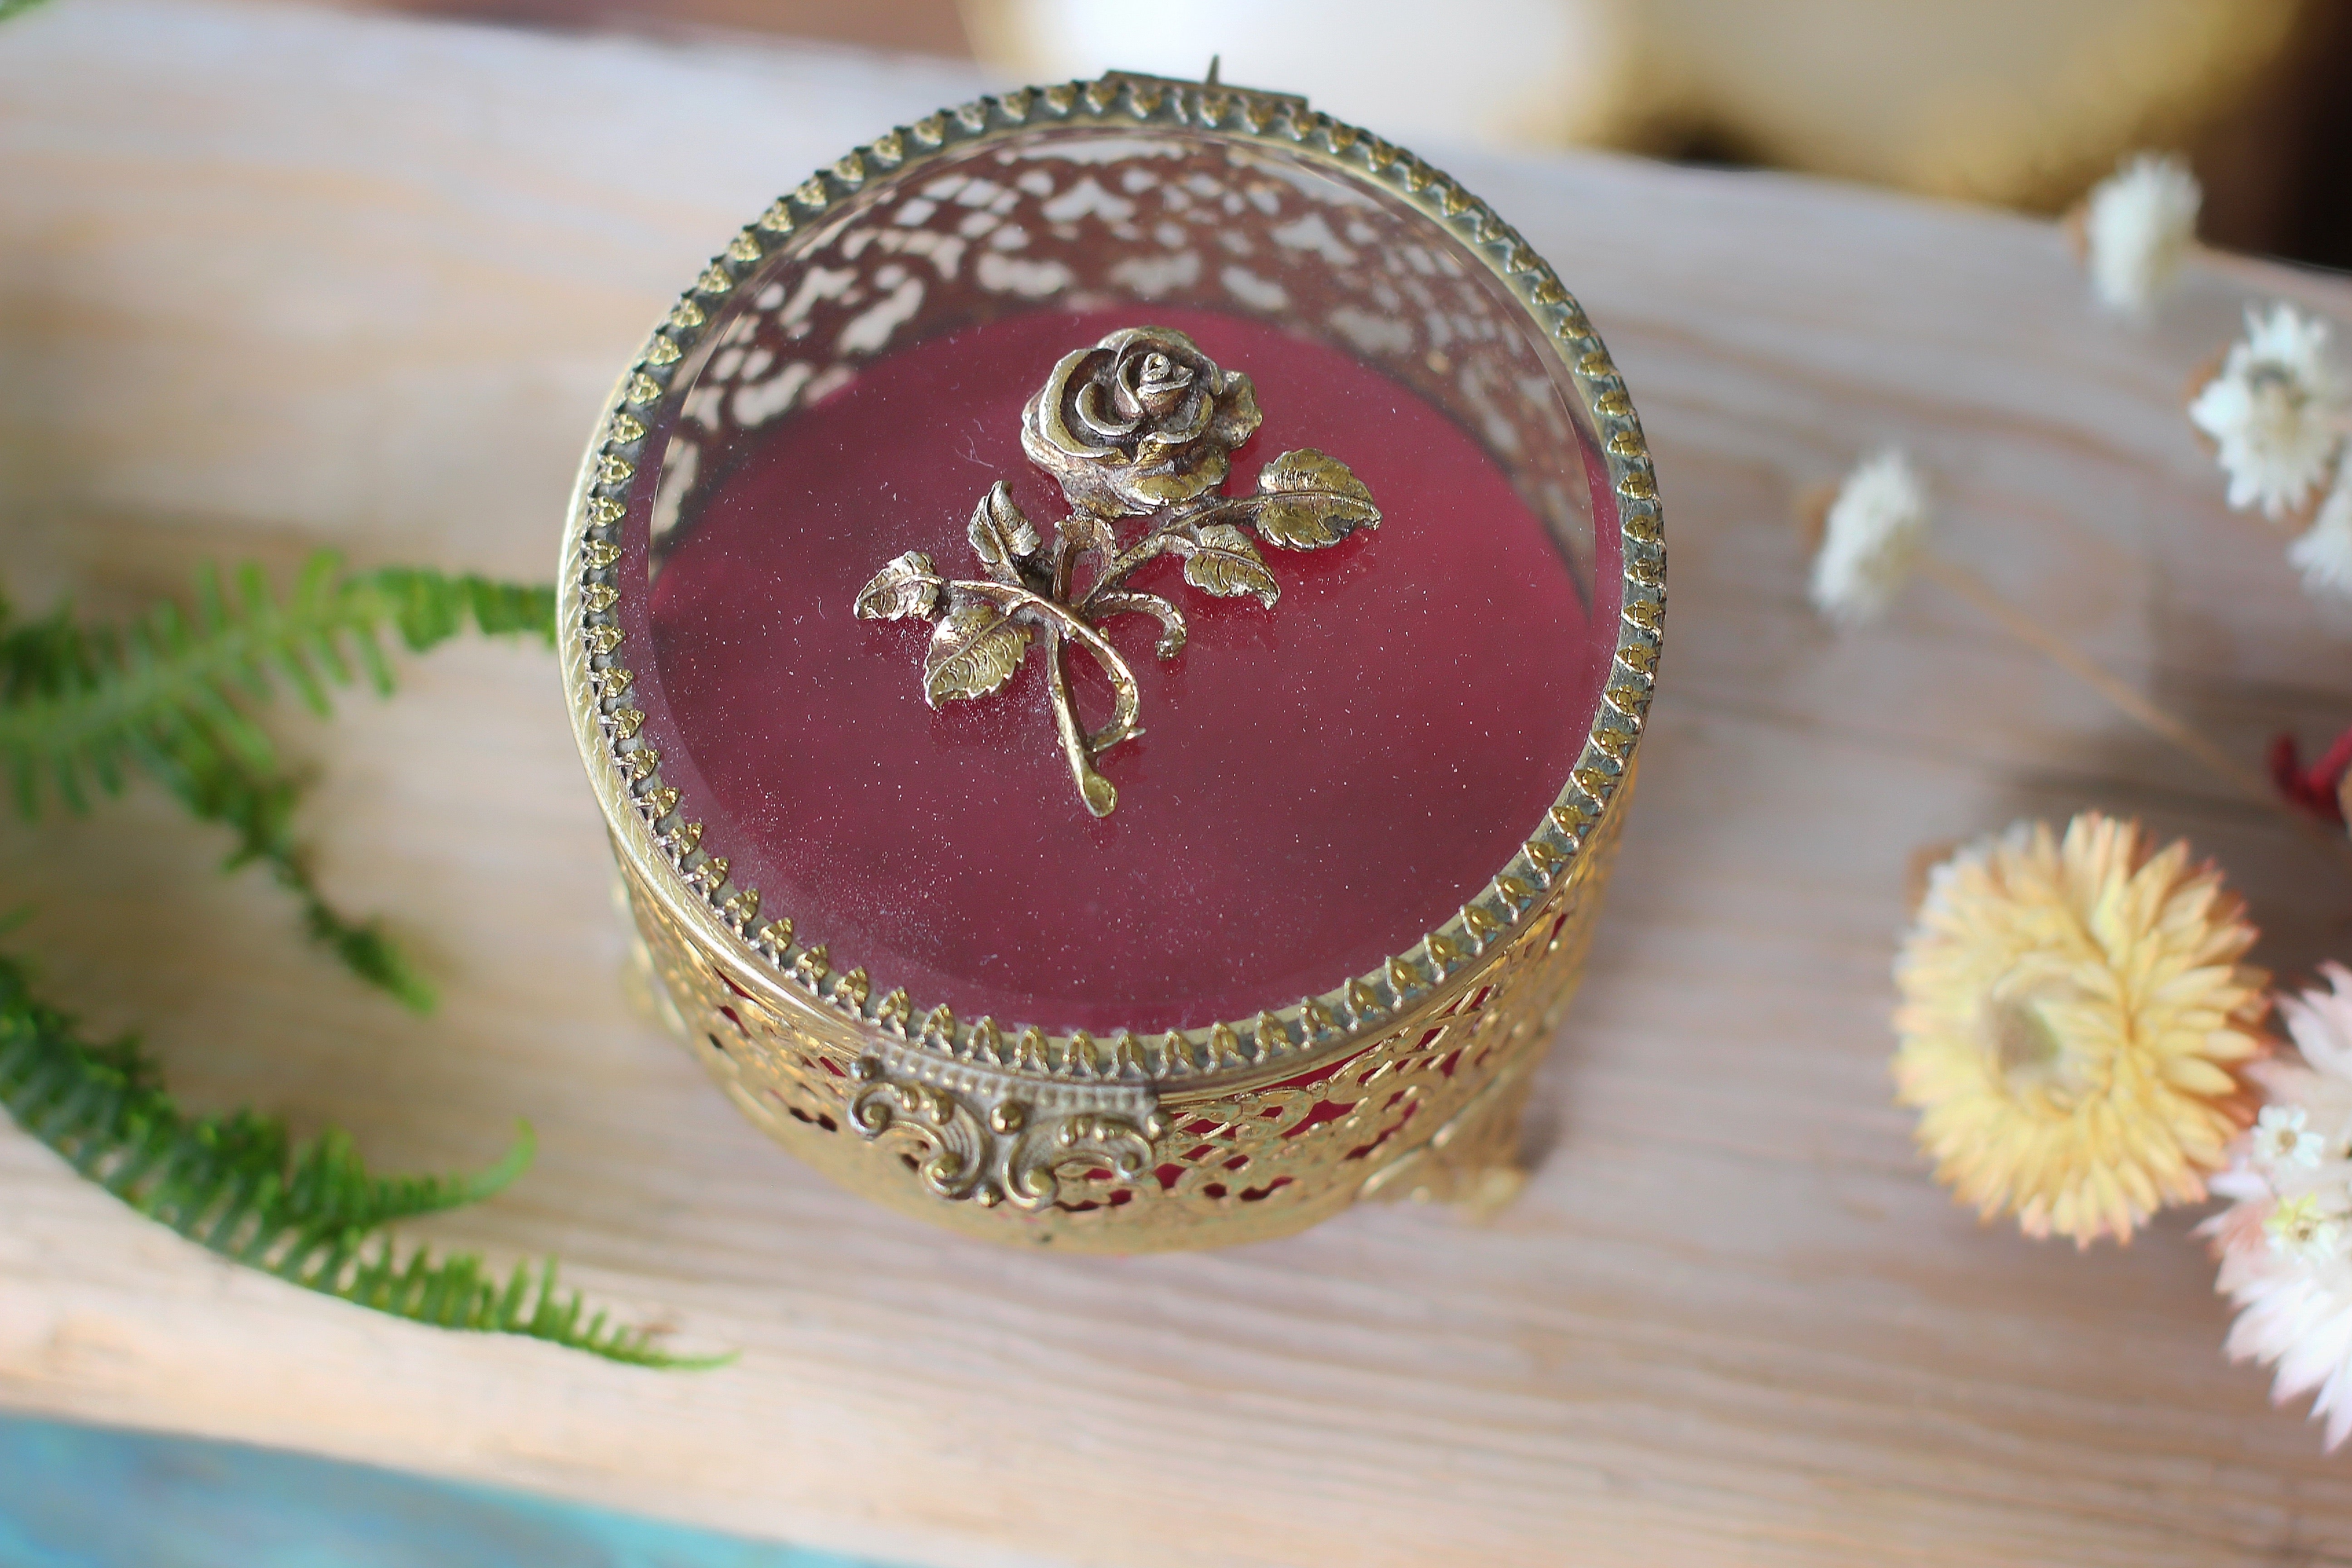 Antique Rose Rounded Jewelry Box